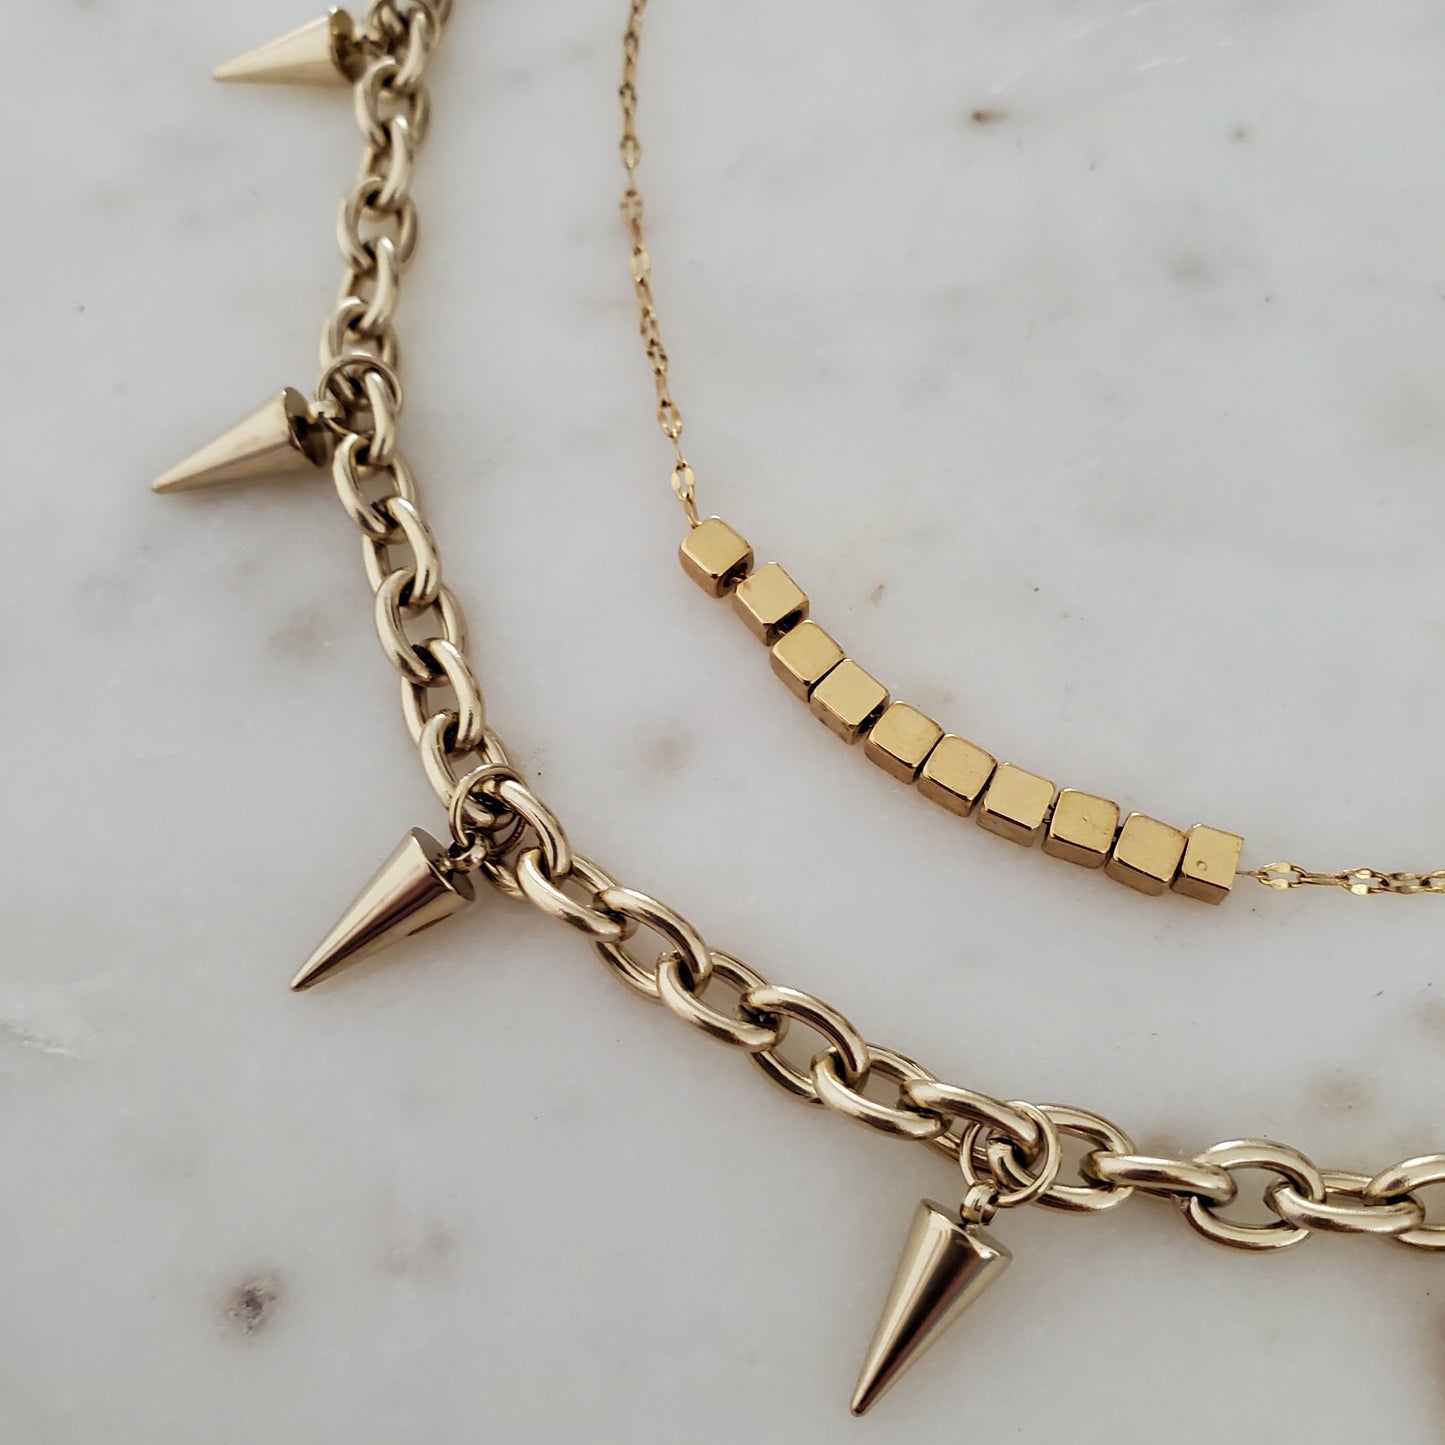 Spiked necklace- Be Golden Collection